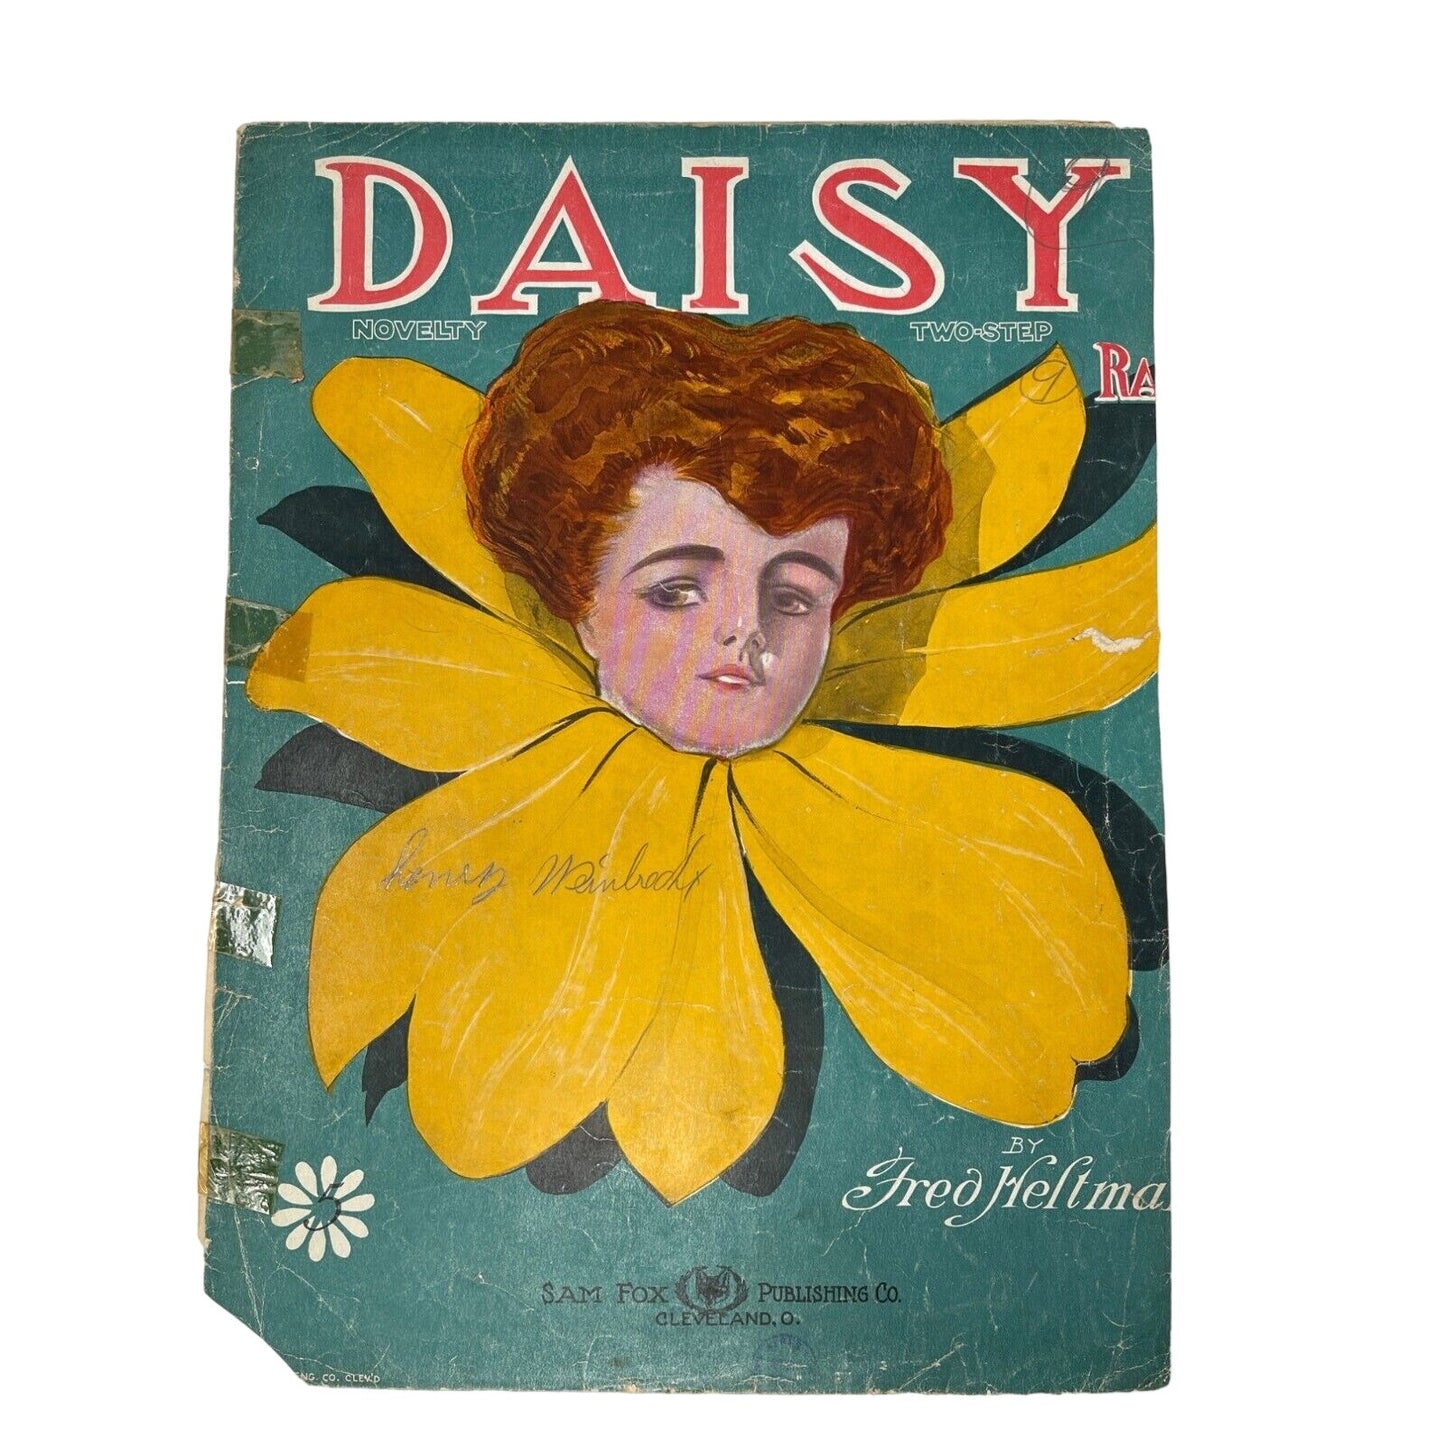 1909 Daisy Rag Novelty Two-Step Sheet Music Fred Heltman